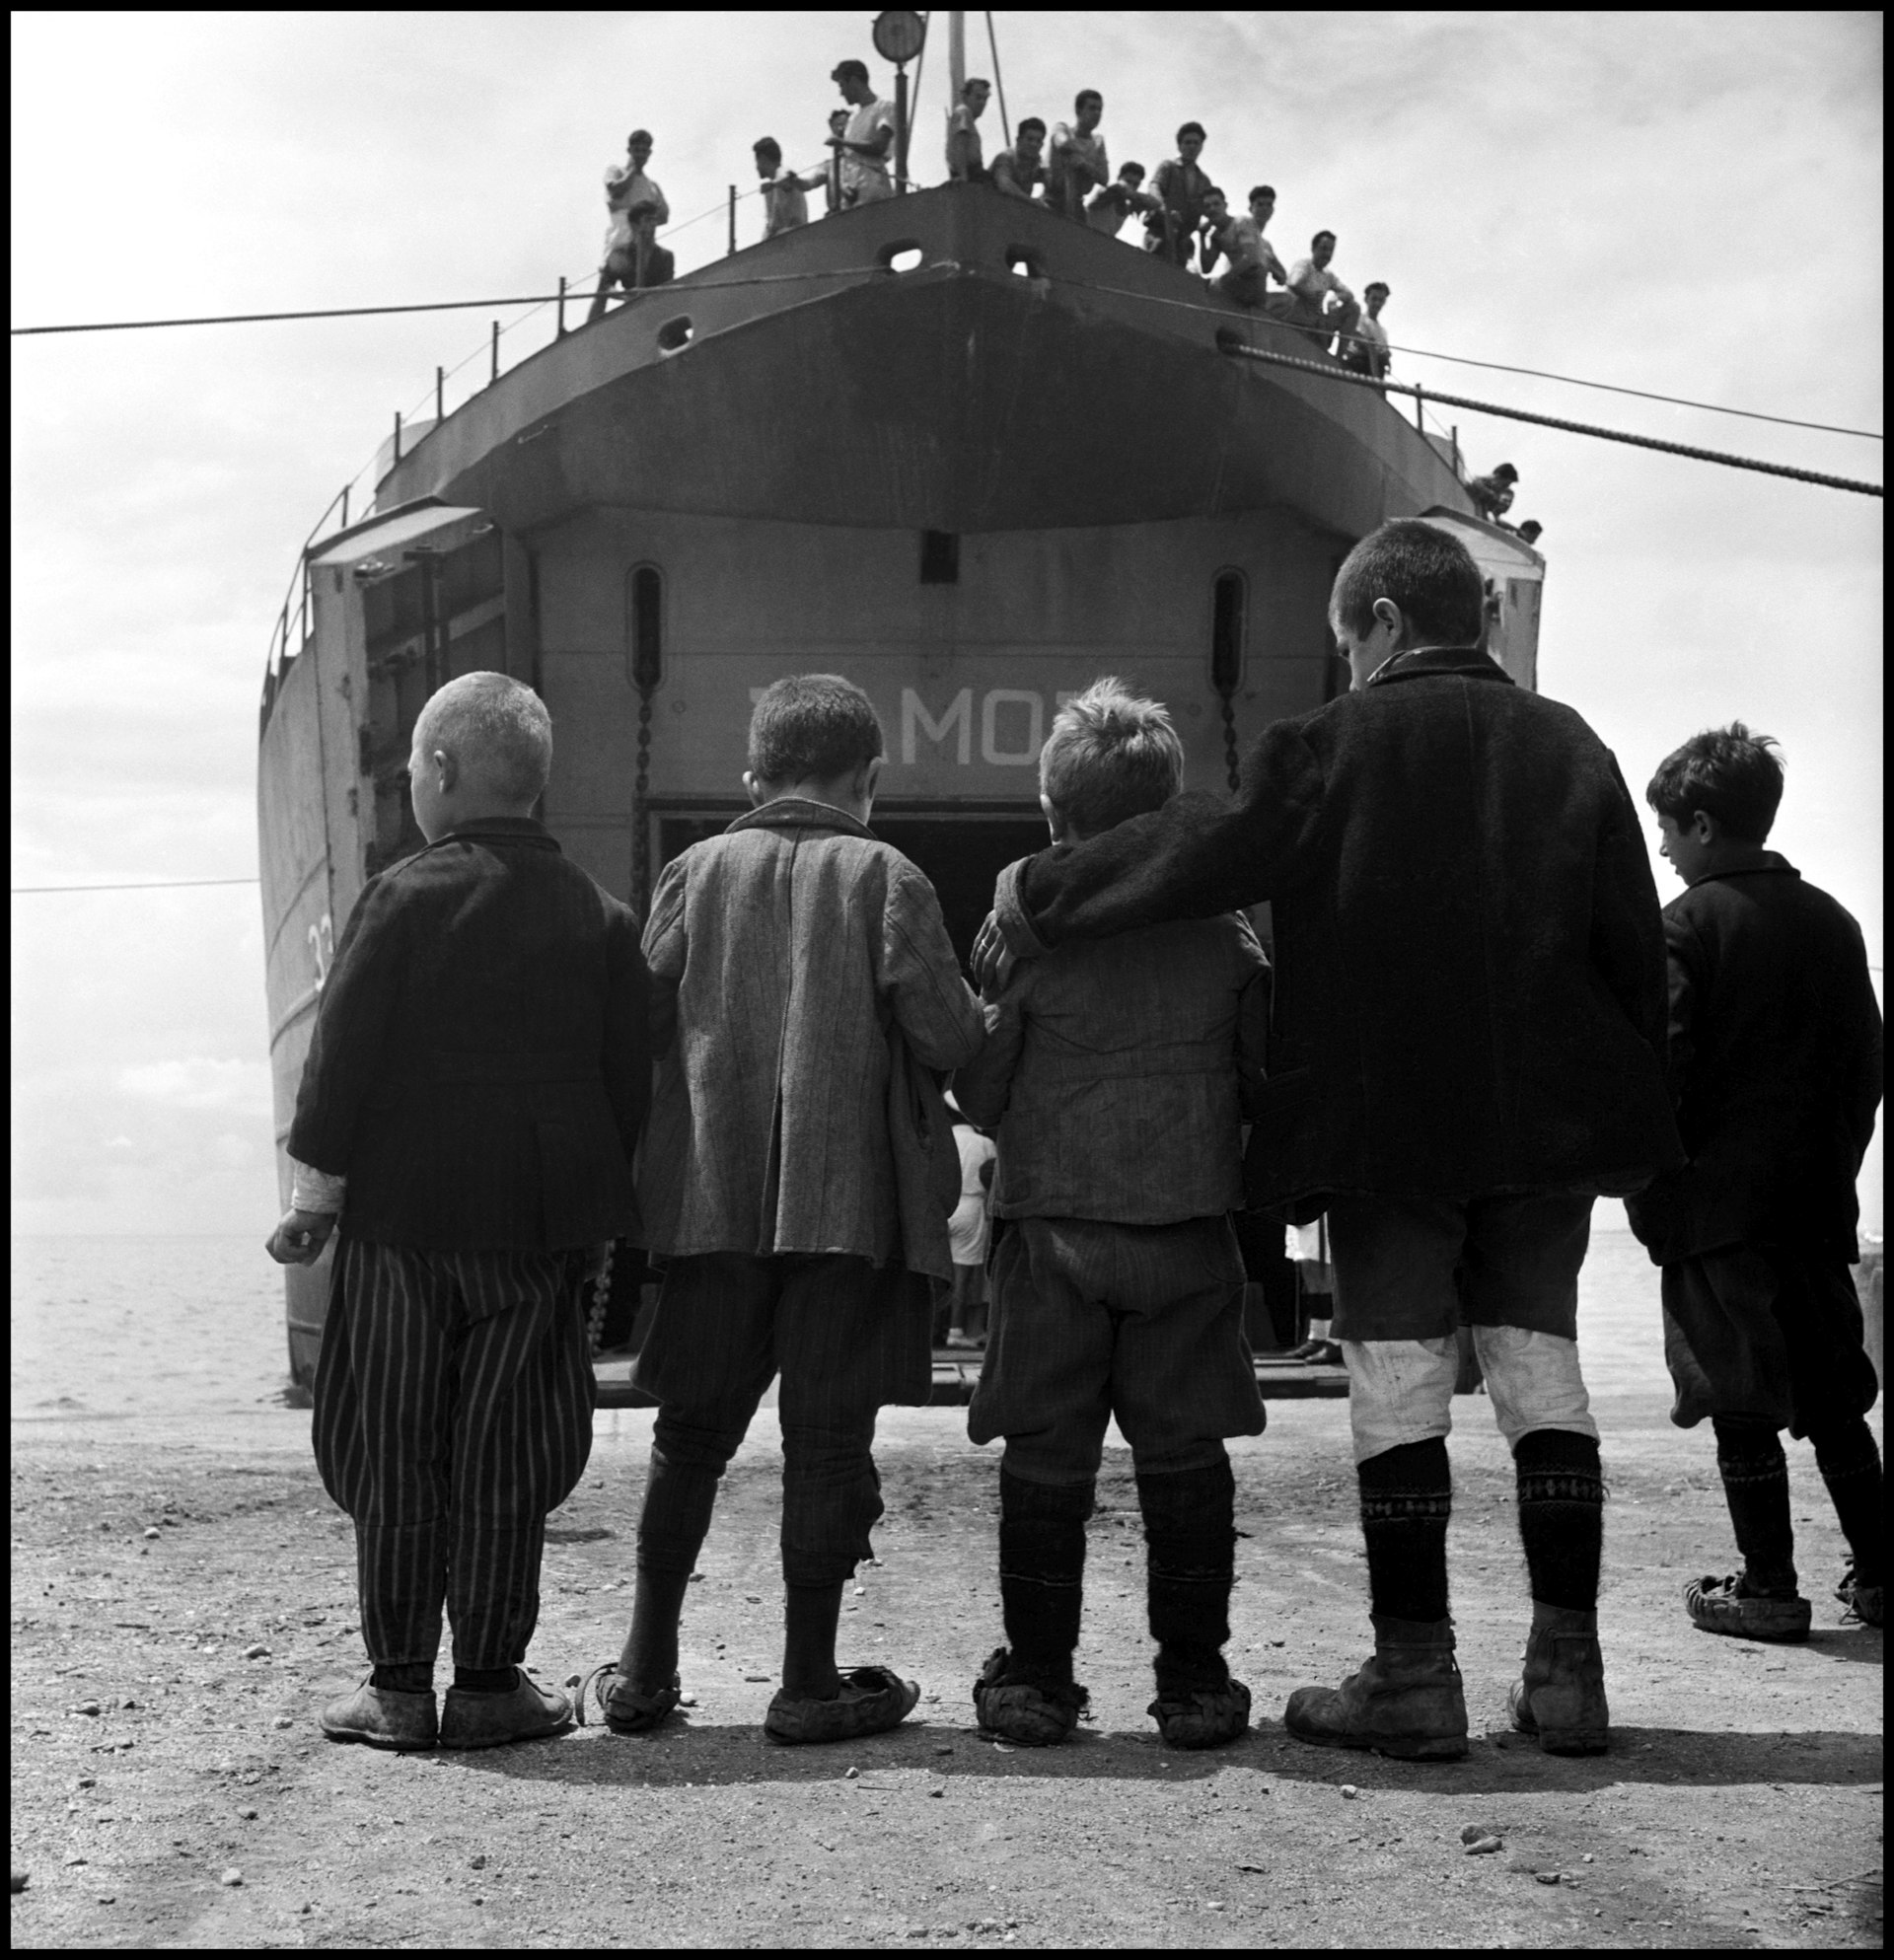  Five boys from Promahi in front if the refugee ship S.S Samos that evacuated children during the Civil War. Greece, 1948 © David Seymour